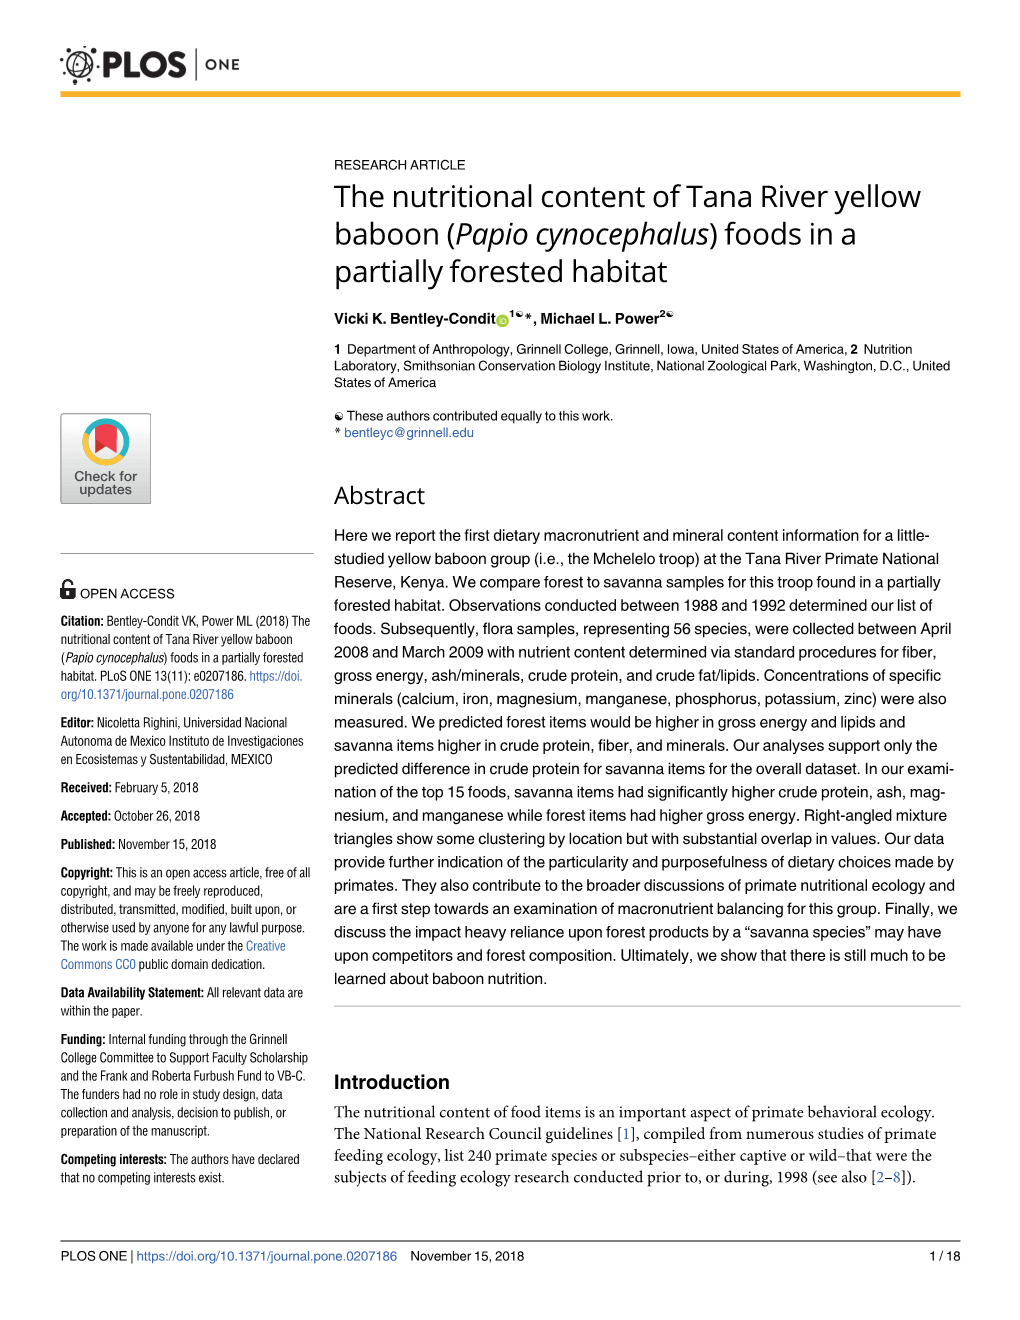 The Nutritional Content of Tana River Yellow Baboon (Papio Cynocephalus) Foods in a Partially Forested Habitat